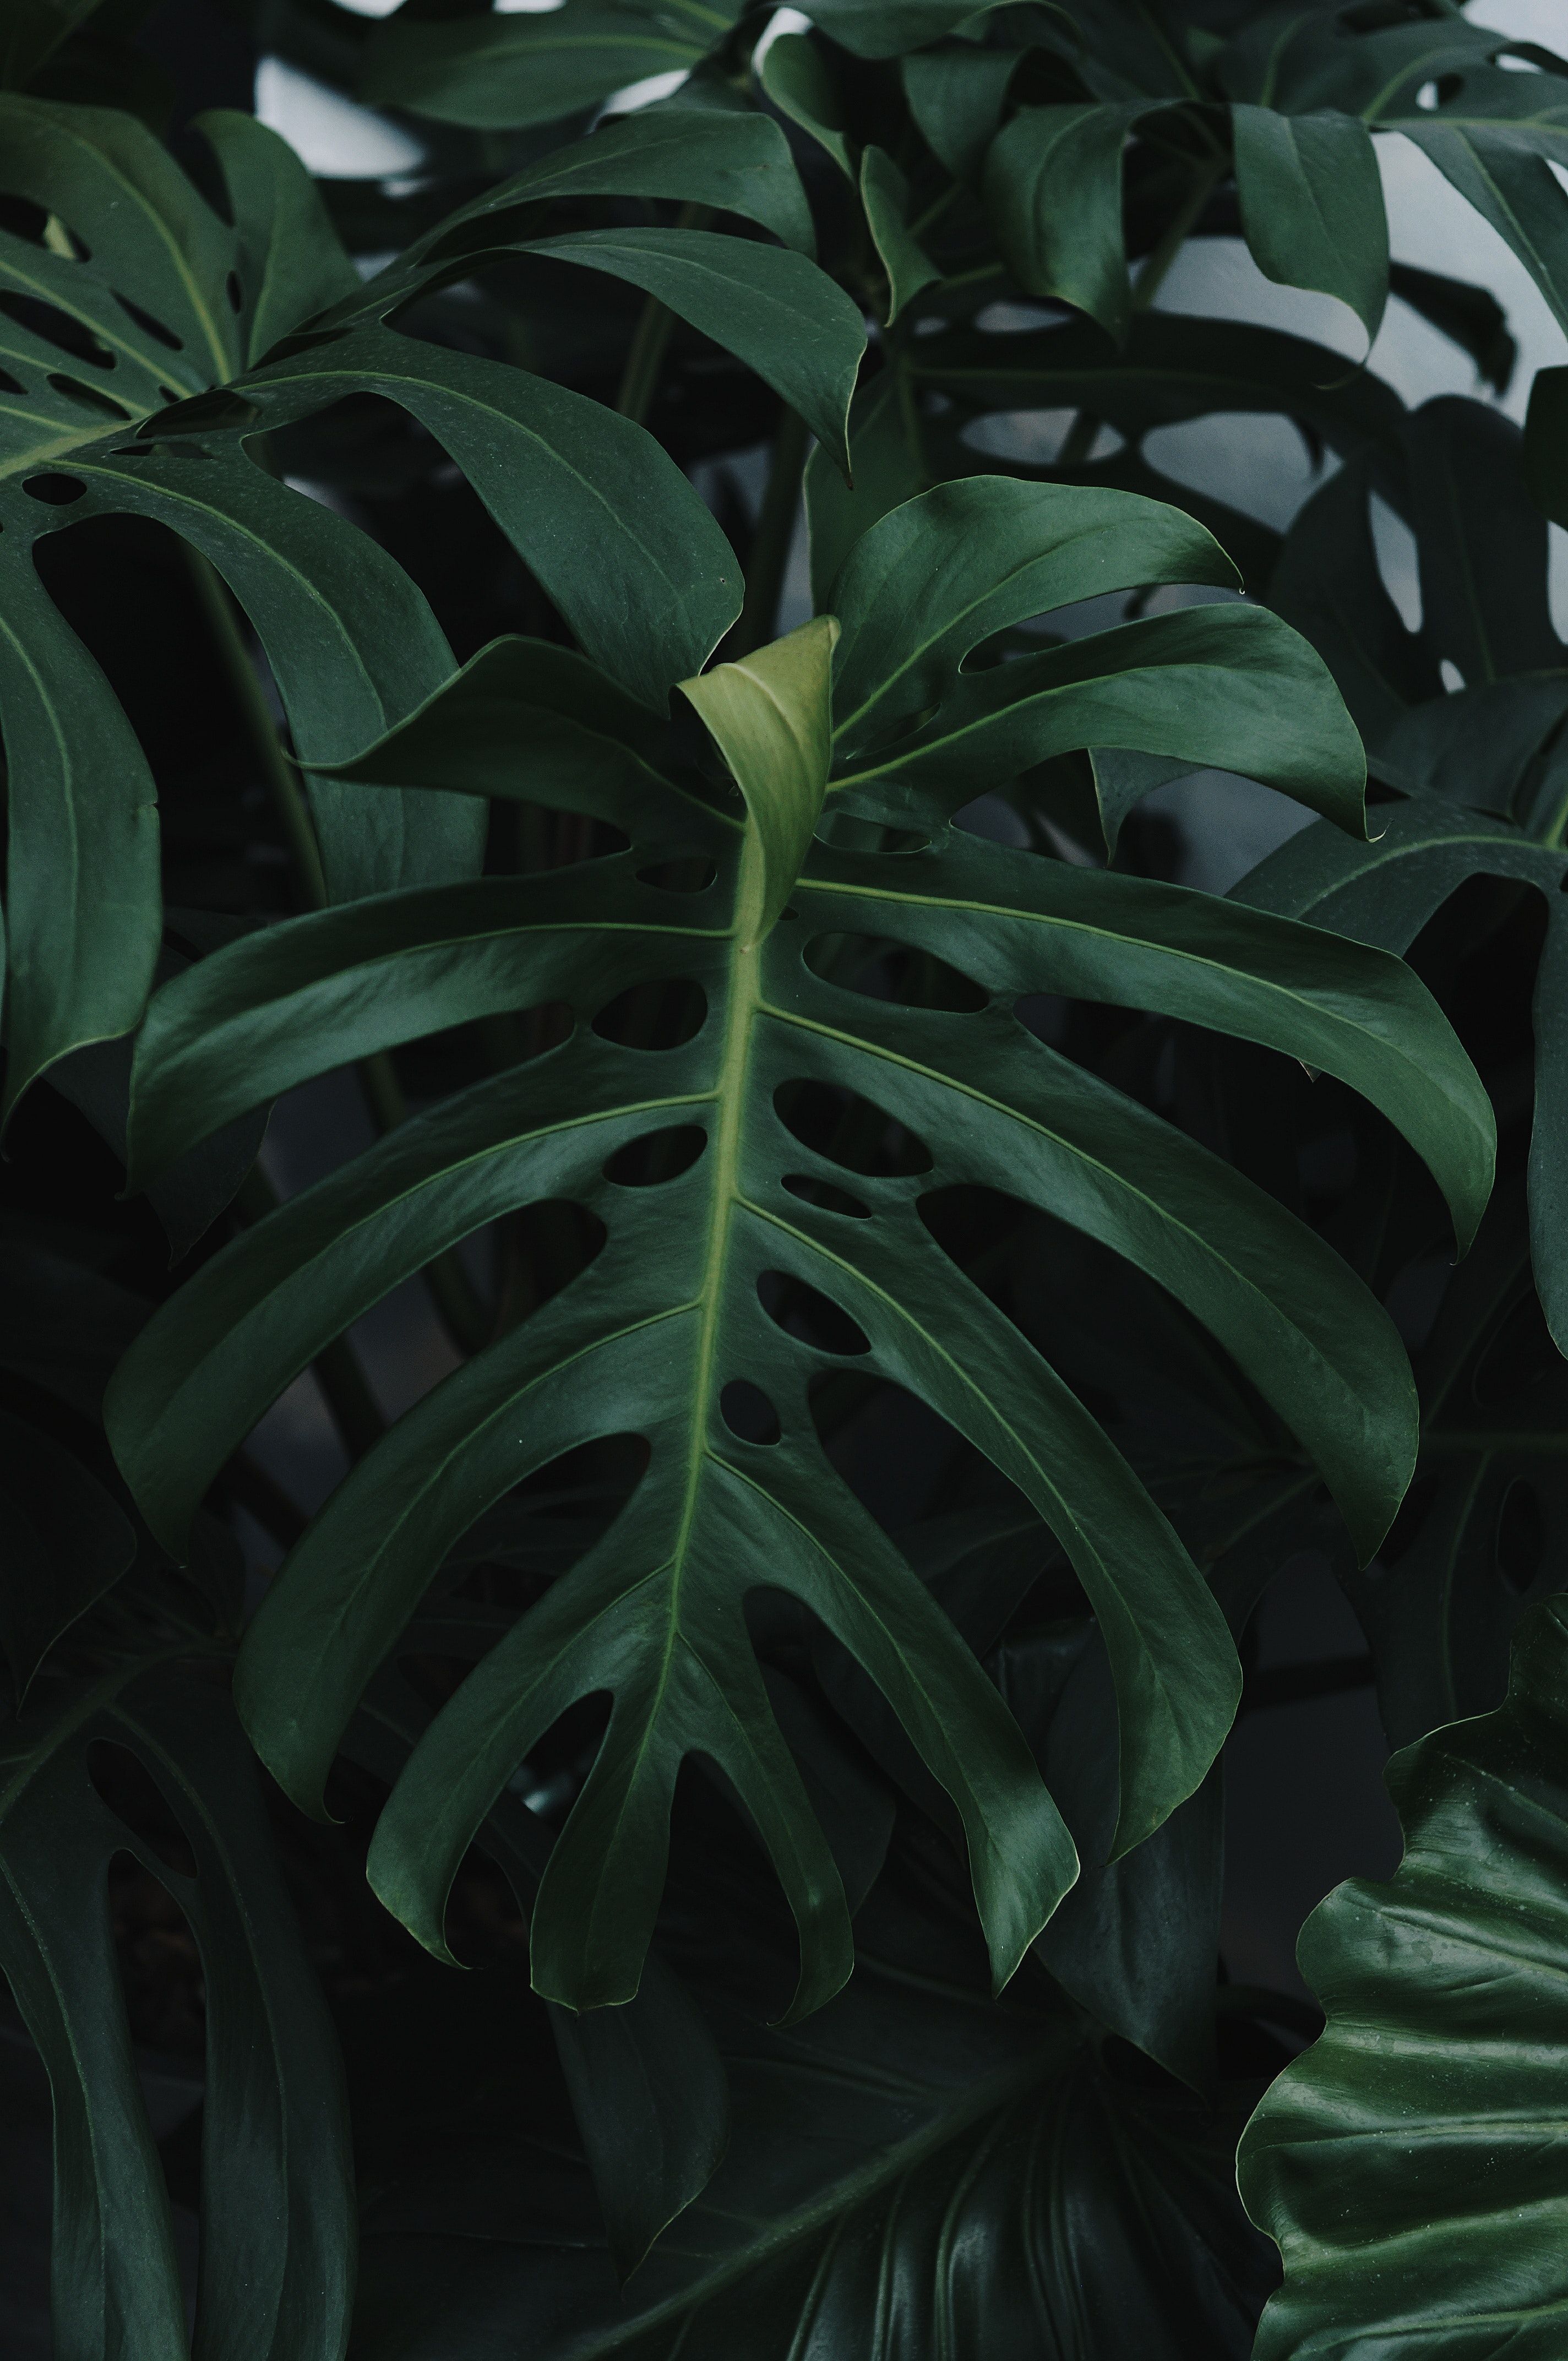 A close up of some green leaves - Monstera